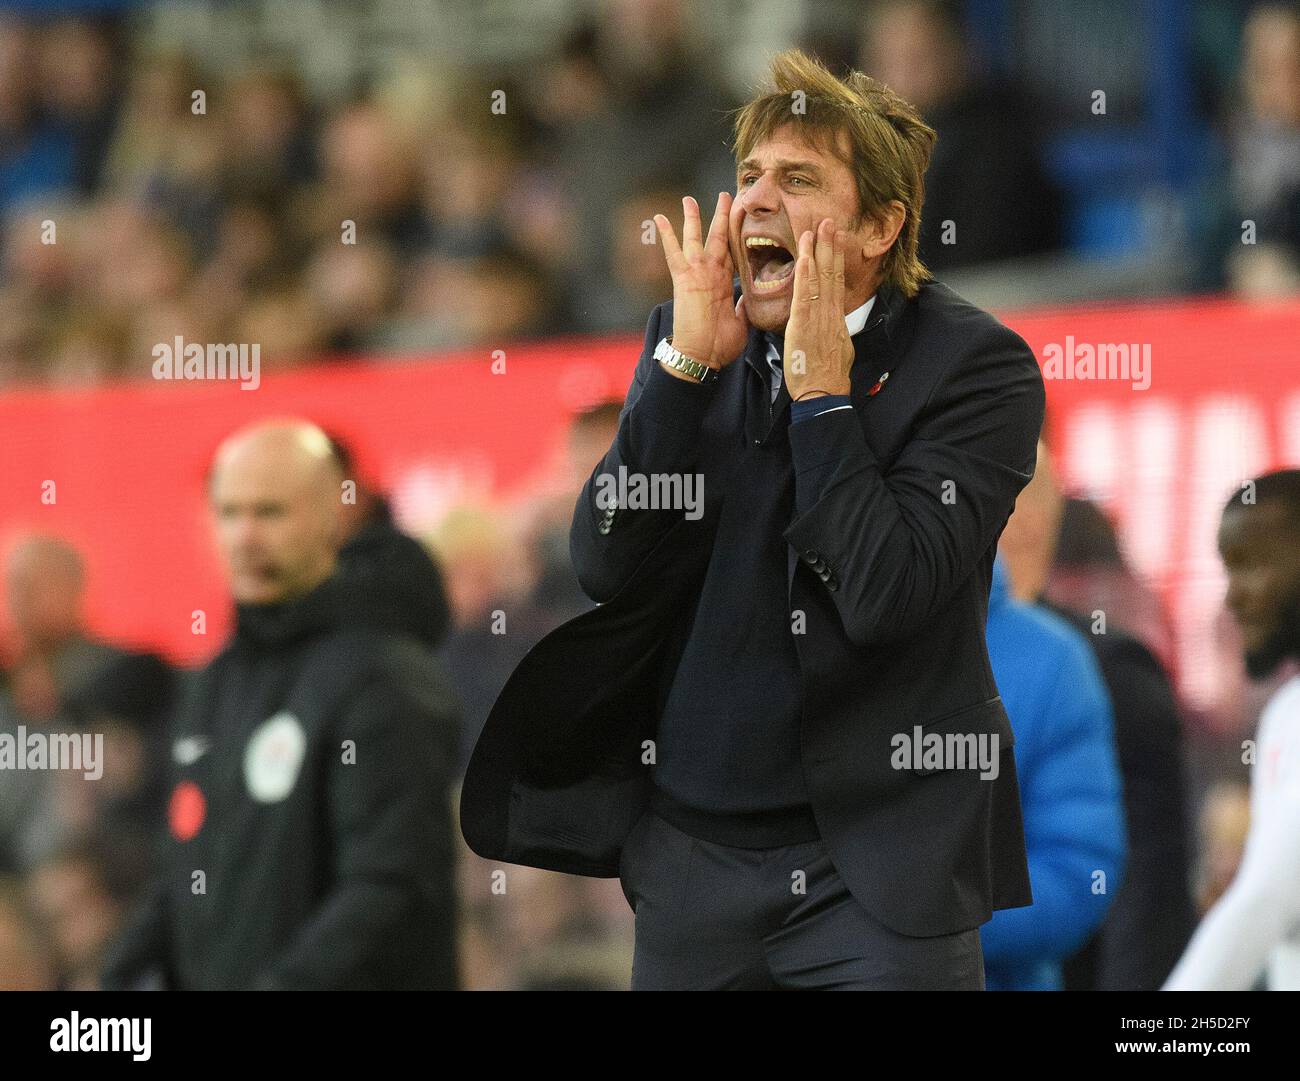 Liverpool,UK. 7th November, 2021. Tottenham Hotspur Manager Antonio Conte during the Premier League match at Goodison Park. Picture Mark Pain / Alamy Stock Photo